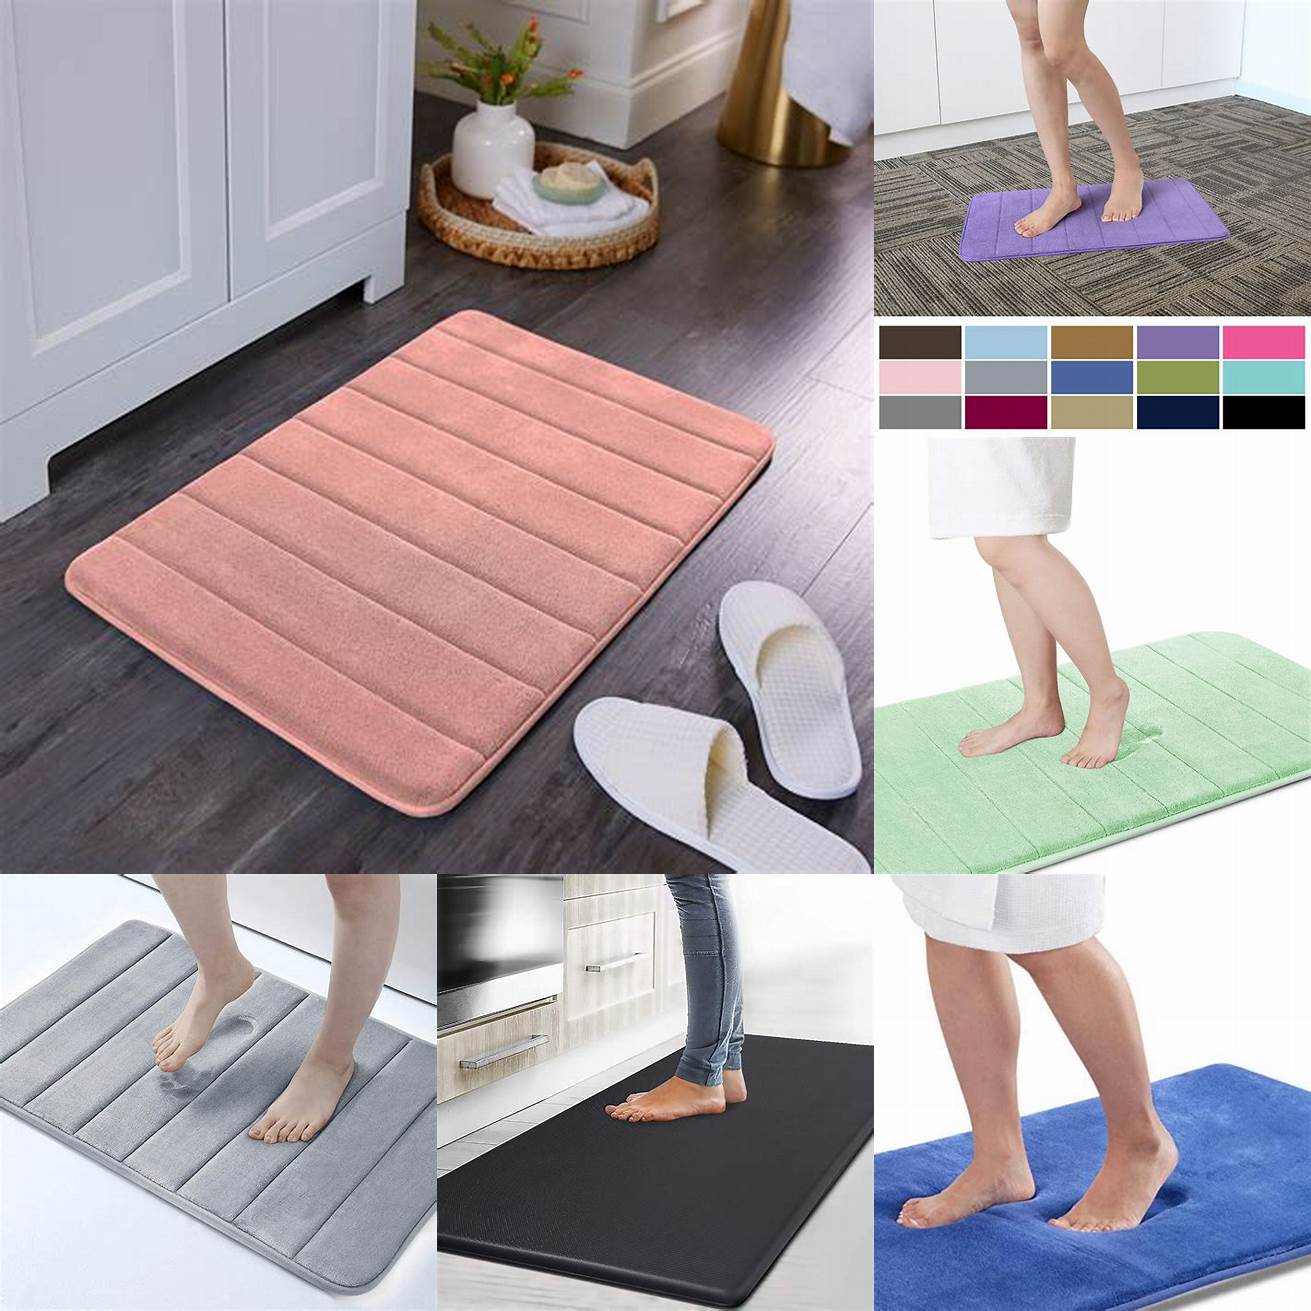 3 Memory Foam Mats These mats are made of memory foam and provide excellent cushioning and comfort They are ideal for people with foot and leg problems